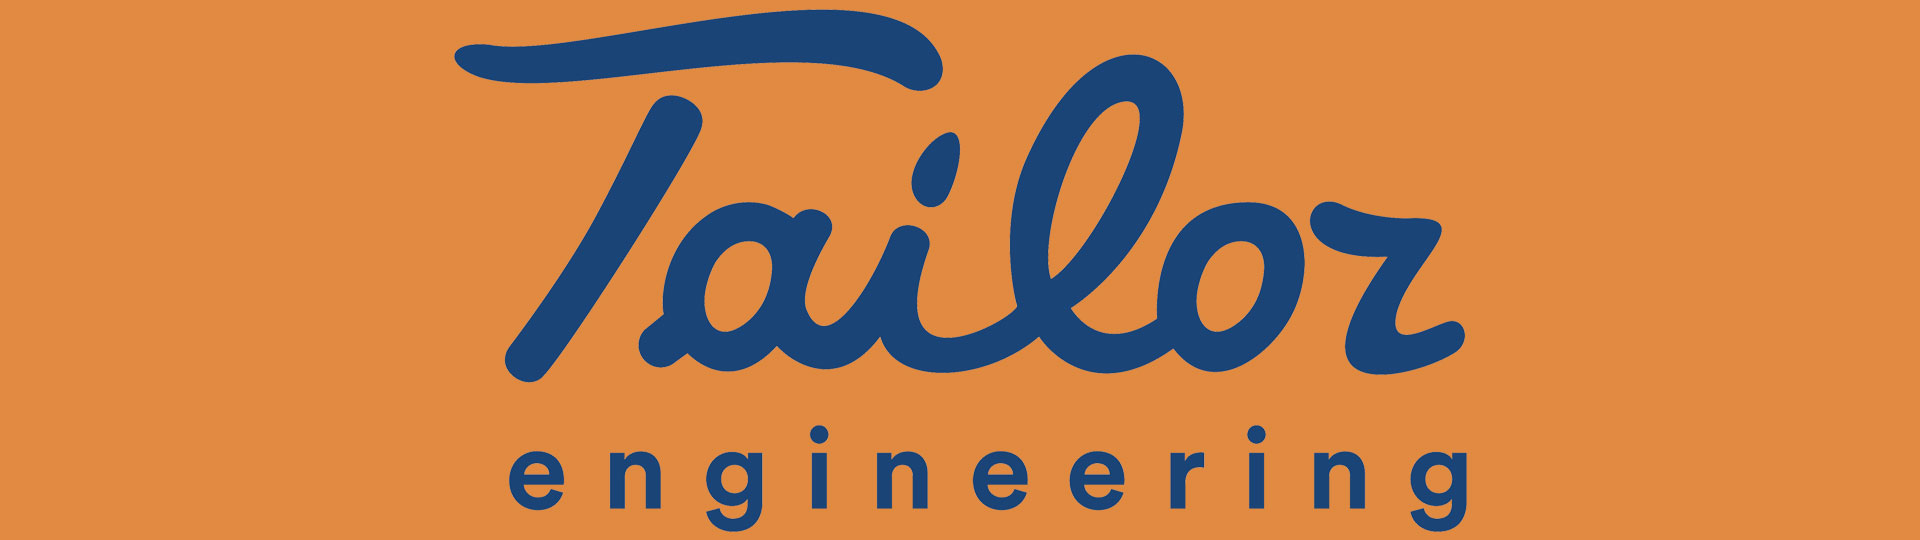 Image of Tailor-engineering about 